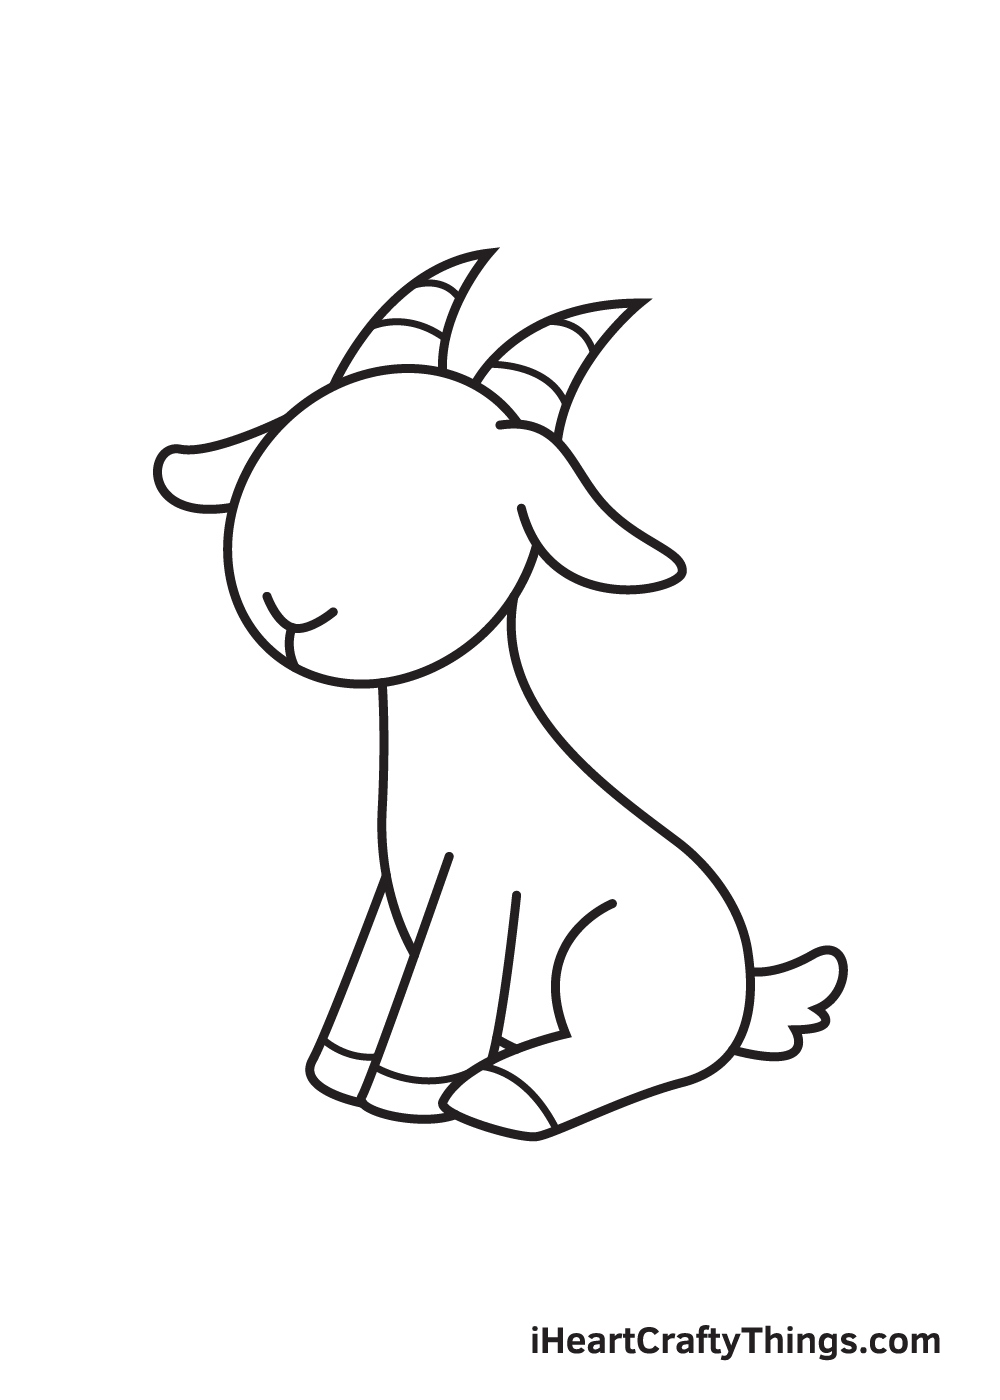 goat drawing - step 8